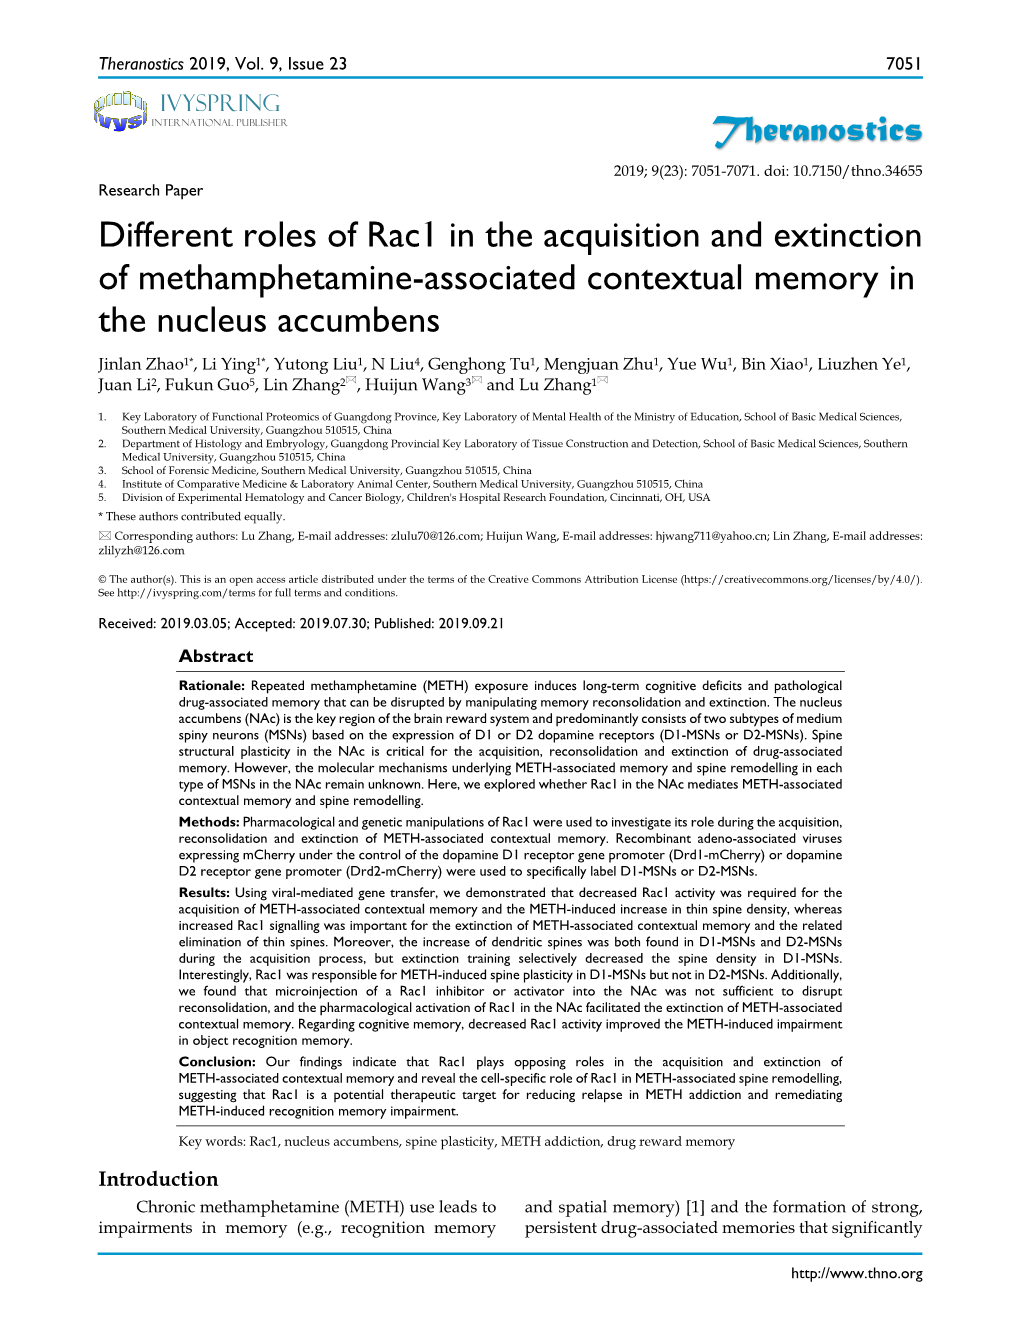 Theranostics Different Roles of Rac1 in the Acquisition and Extinction Of